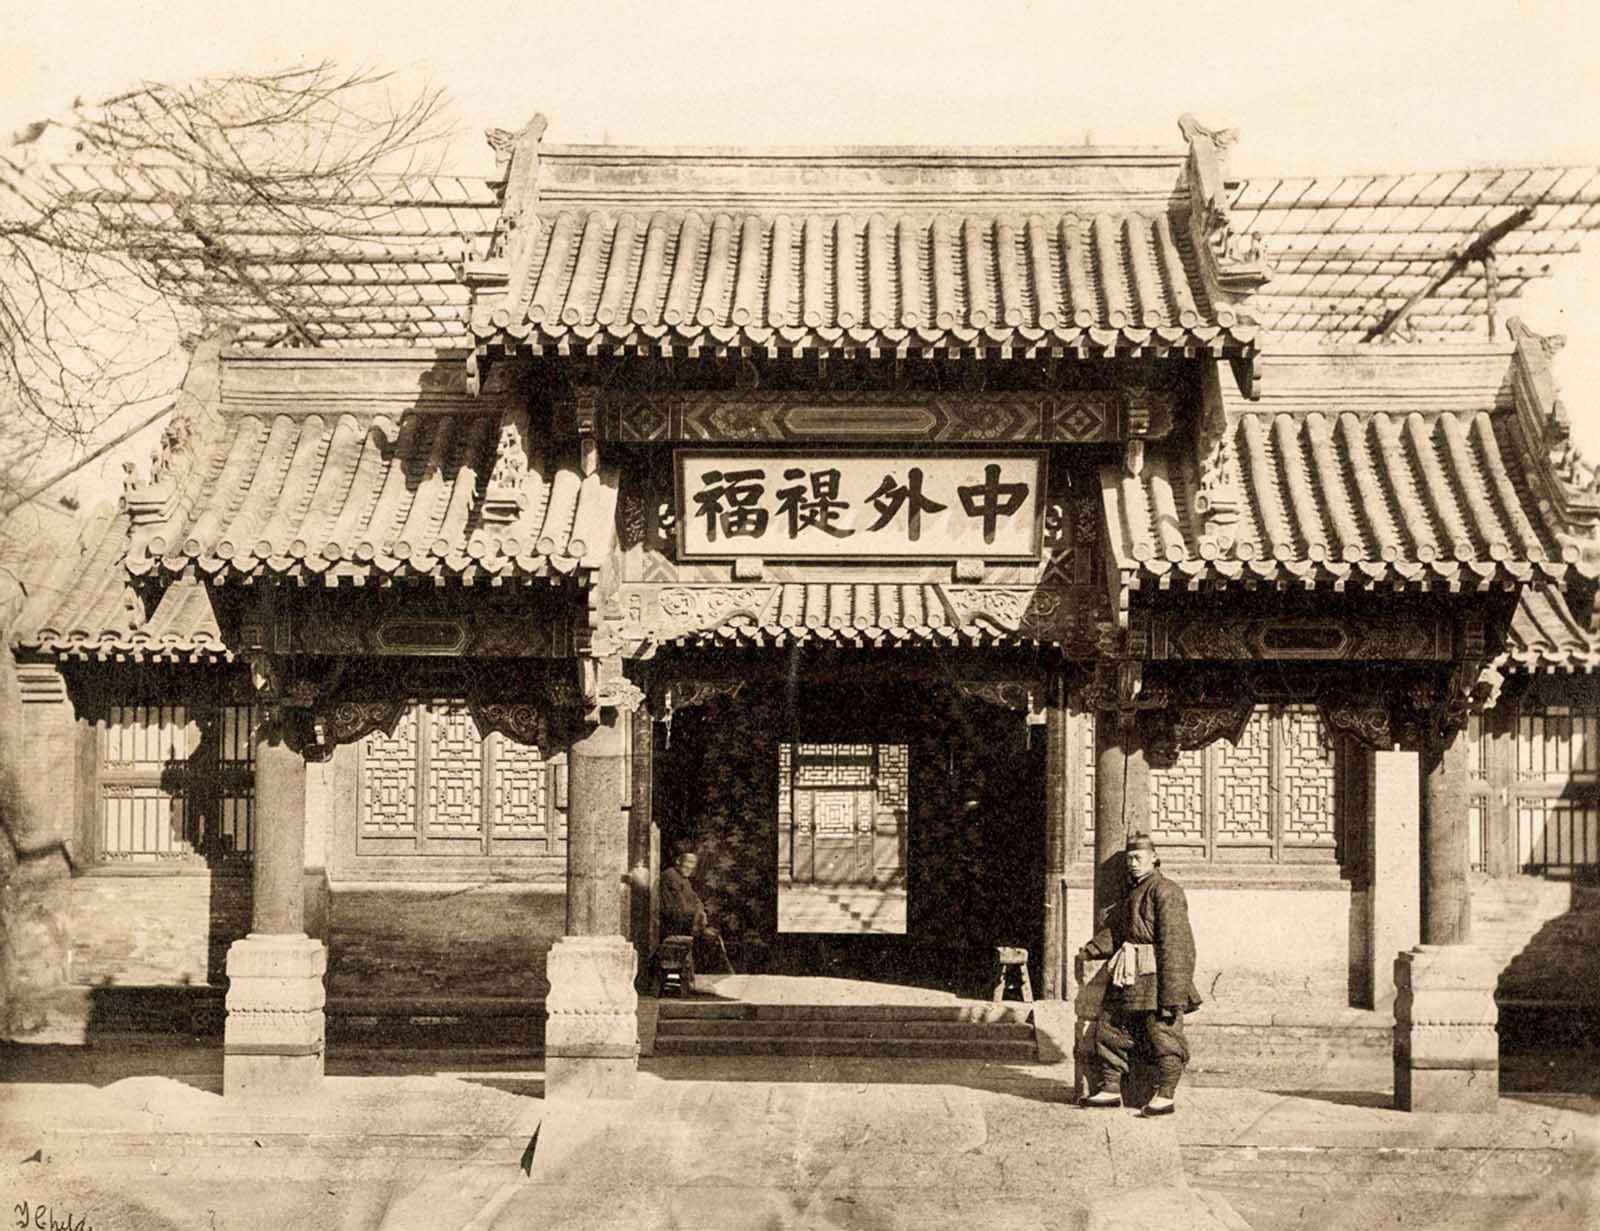 A view of the Zongli Yamen, the Qing government’s Foreign Office. Established by Prince Gong in 1861, it served as a bureaucratic agency dealing with the requests of foreign ministers to China from Peking’s diplomatic quarter.